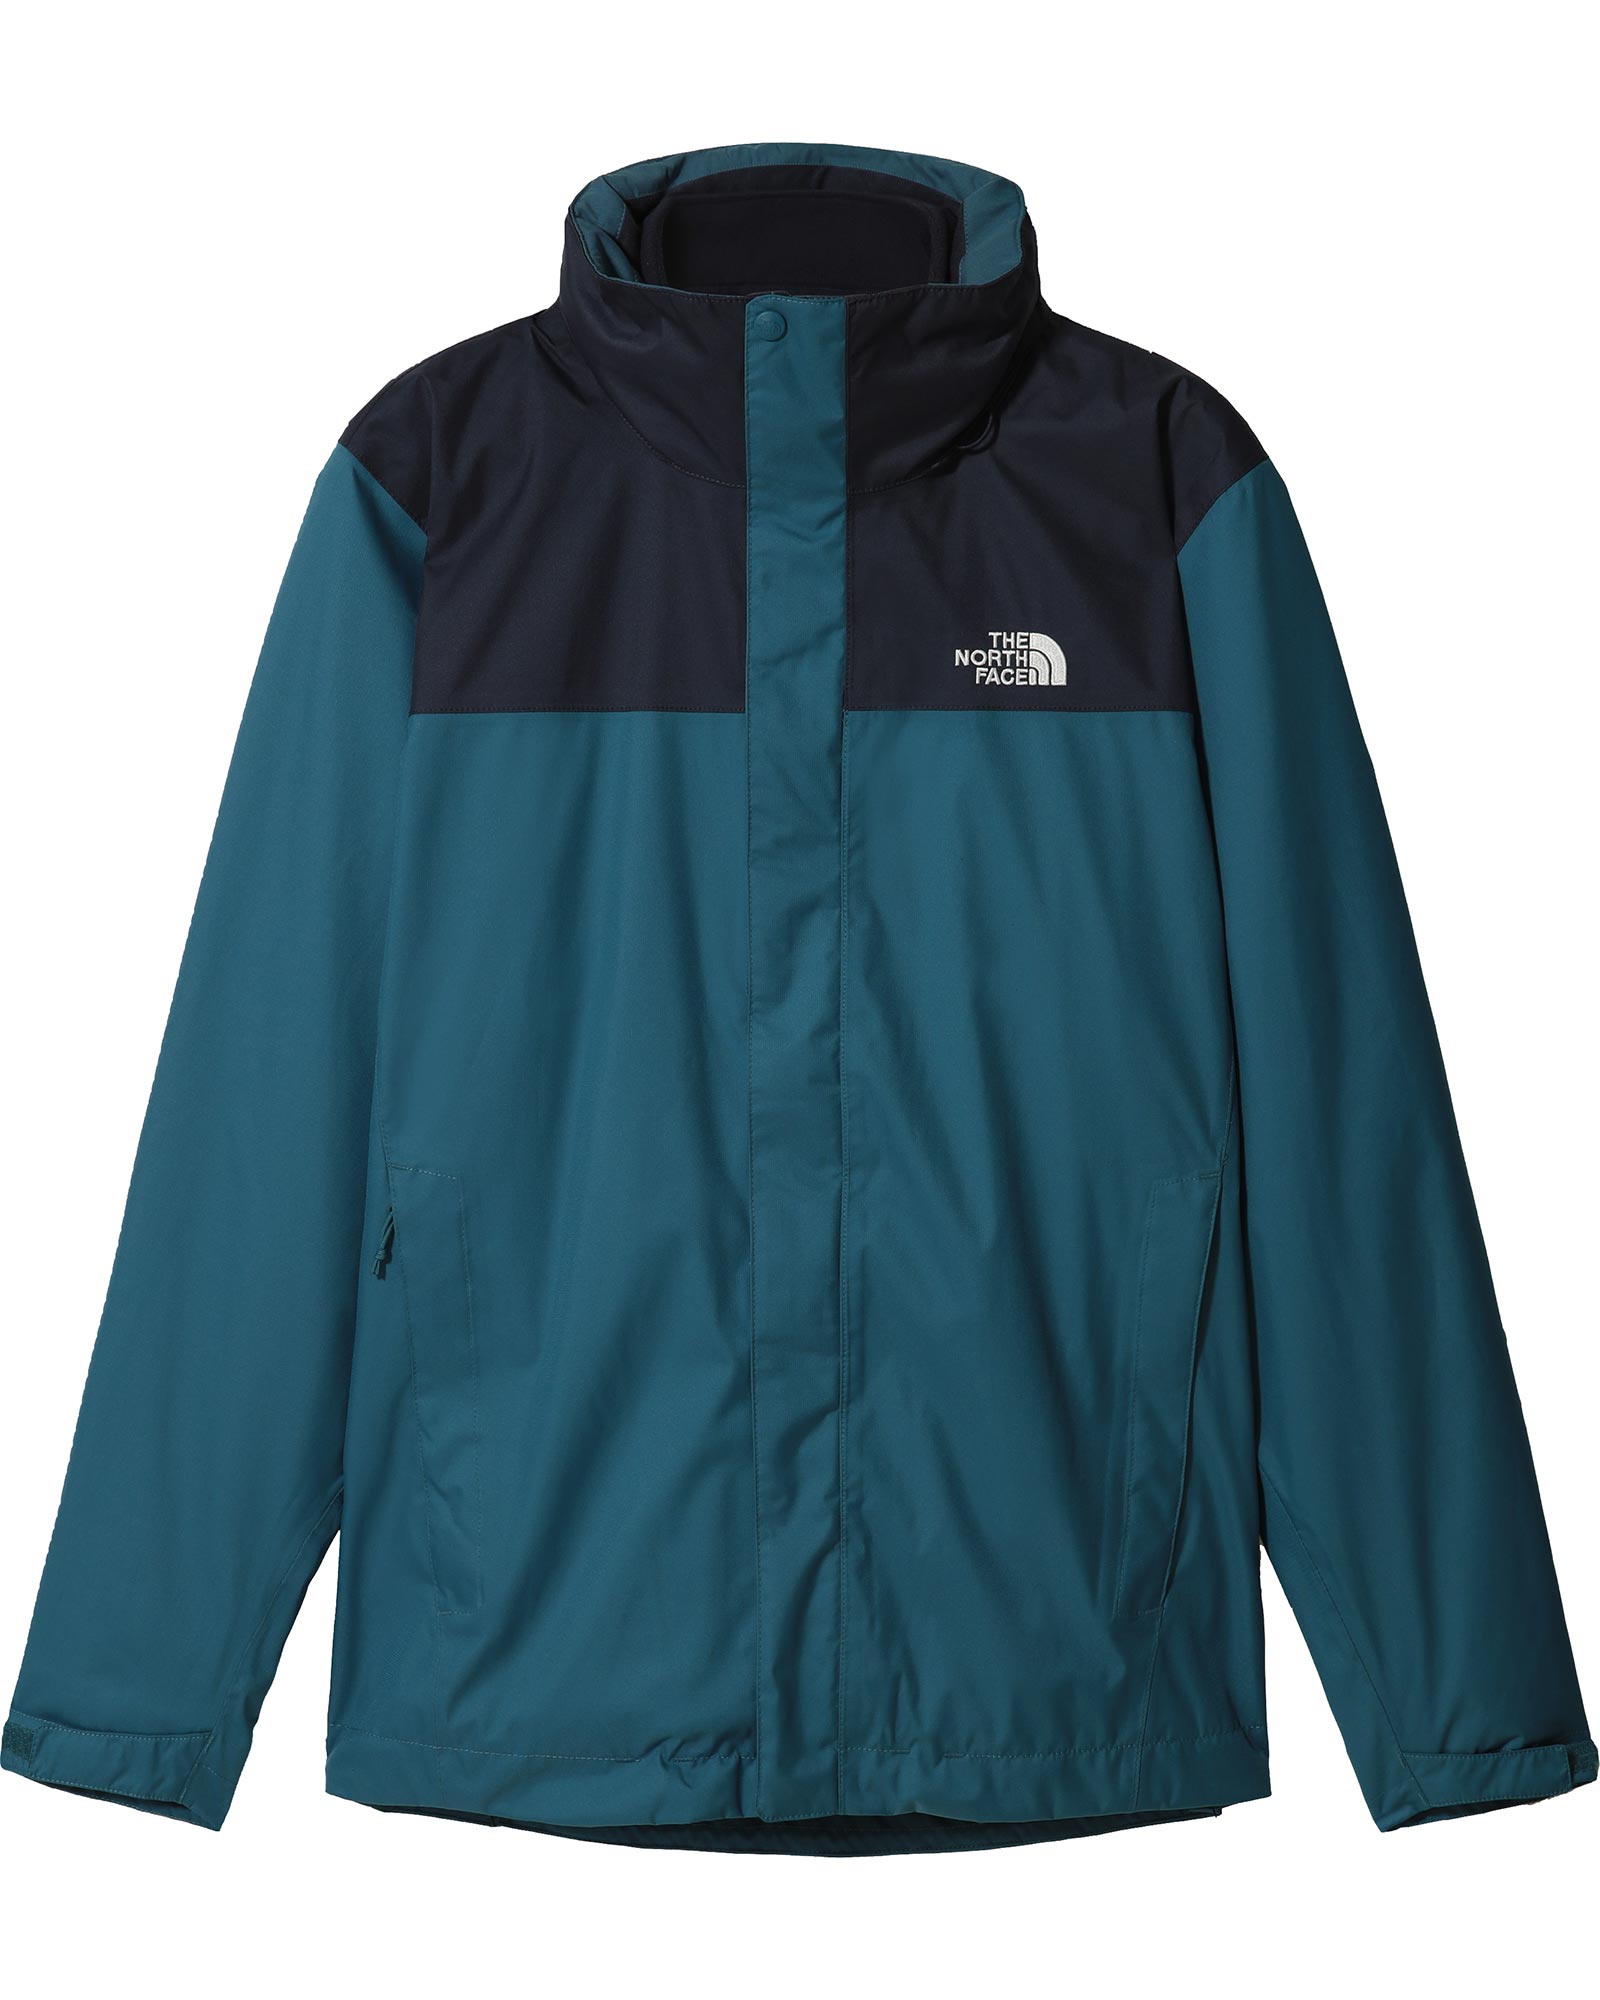 The North Face Evolve Triclimate Mens Jacket